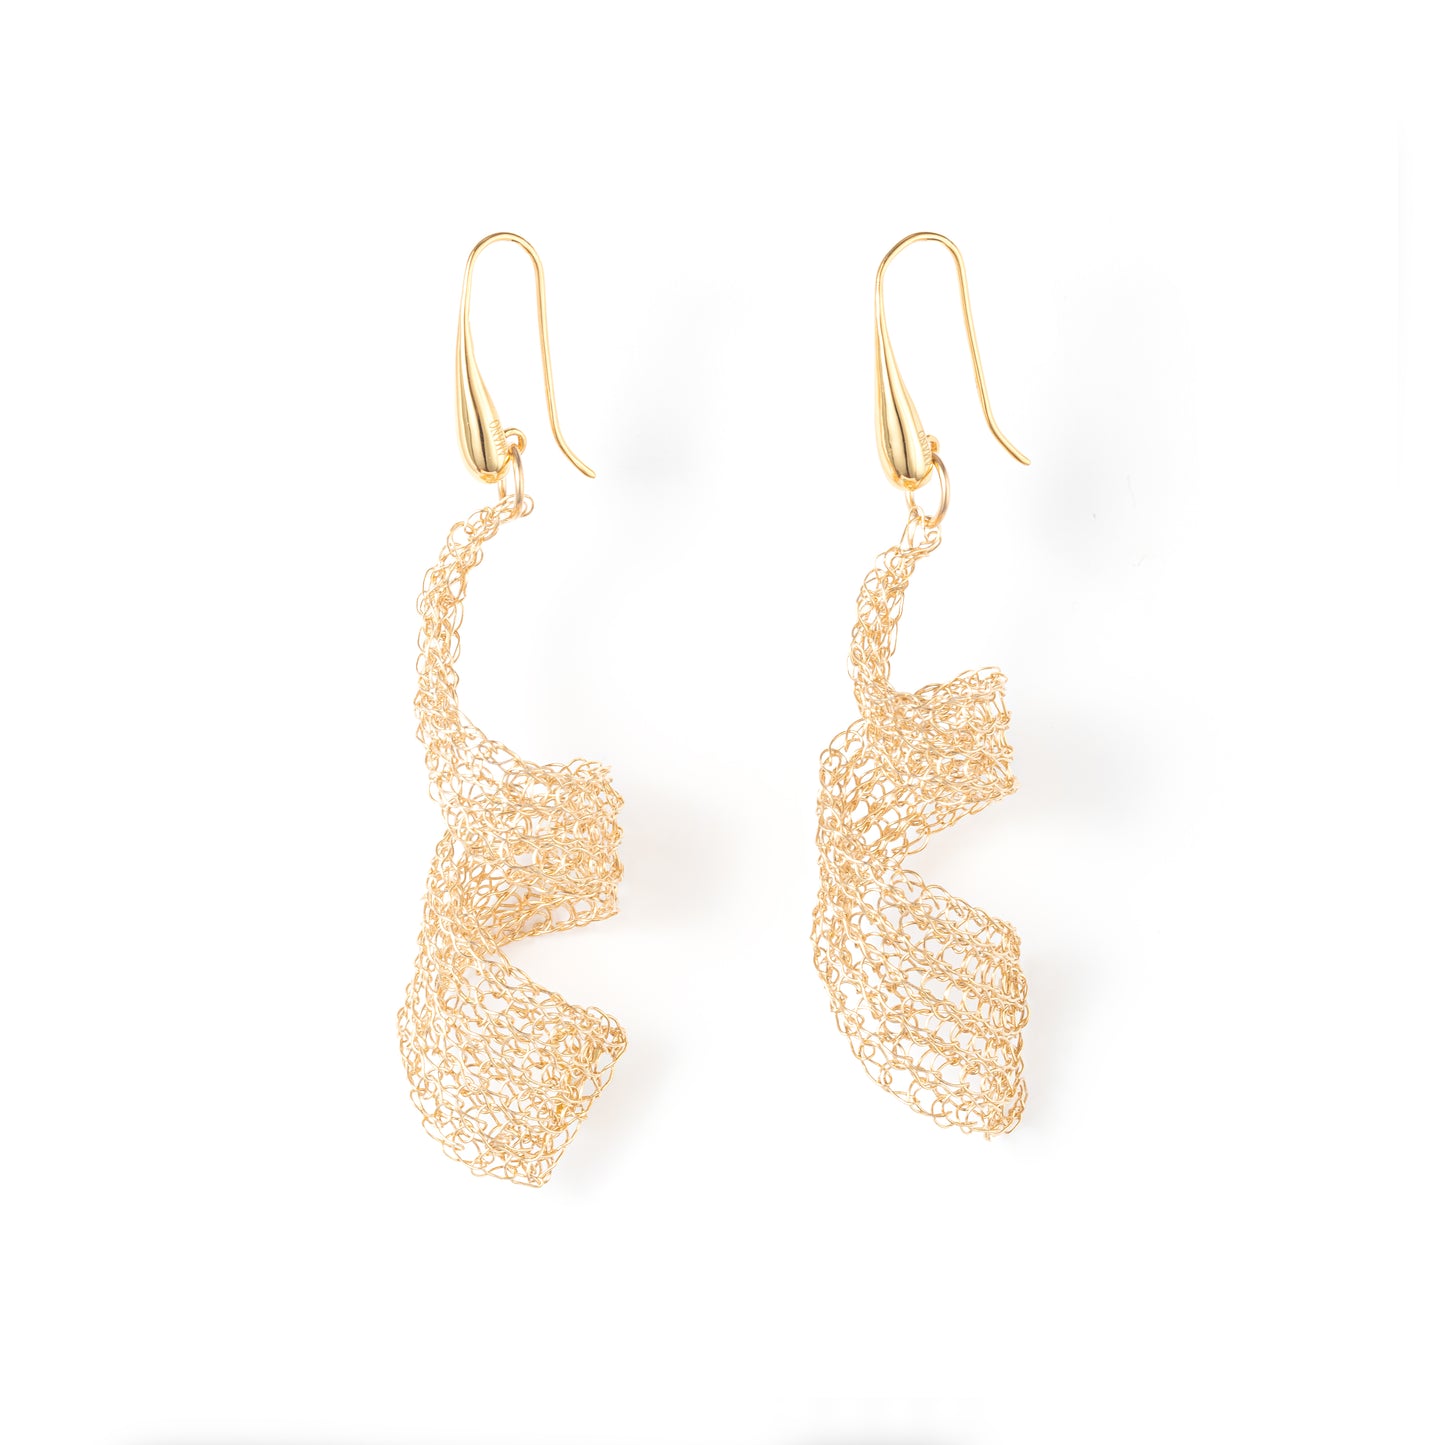 Chasing Light Series - Gold Wave Earrings